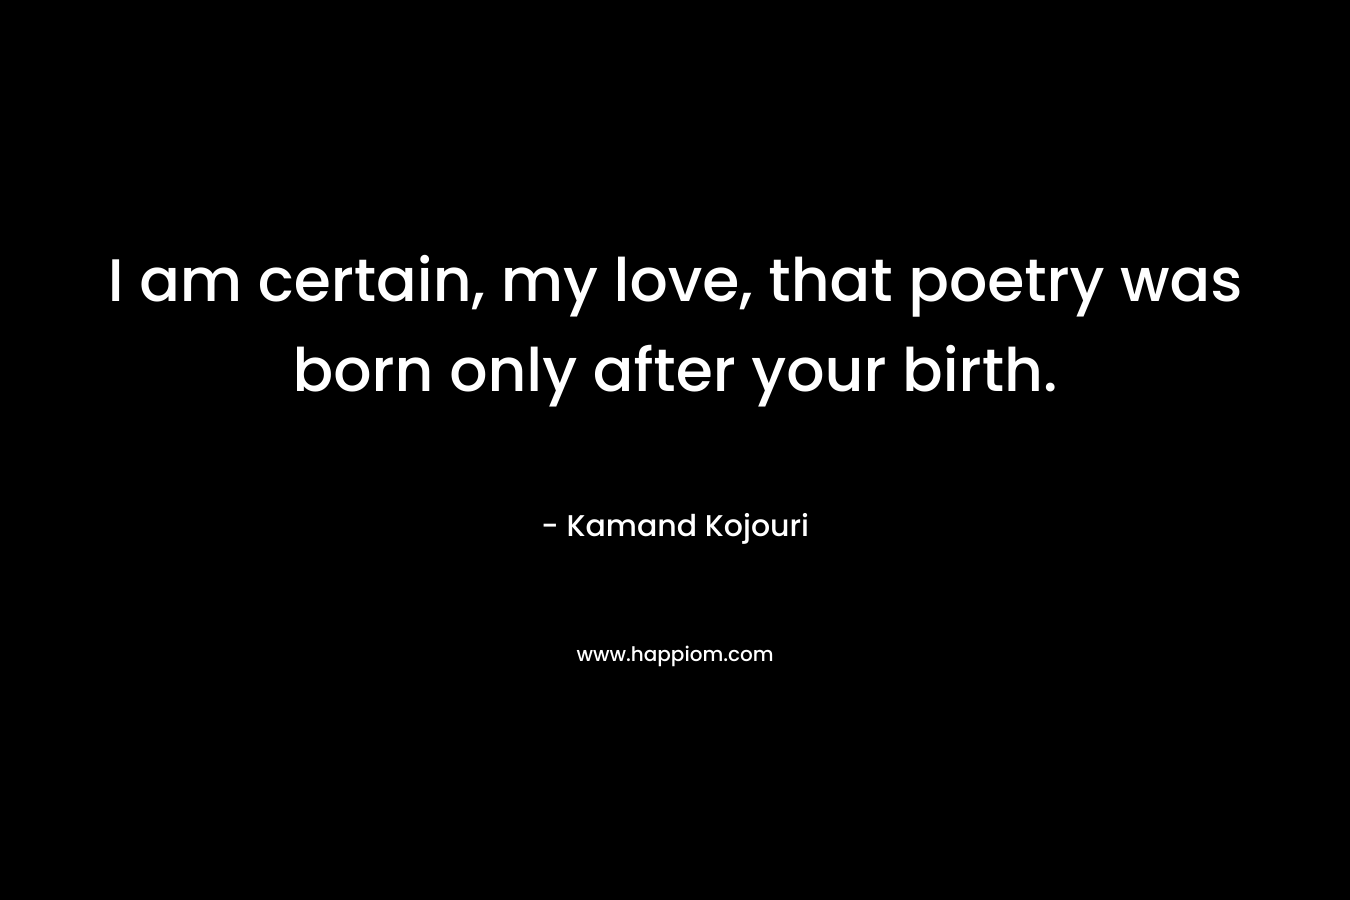 I am certain, my love, that poetry was born only after your birth.